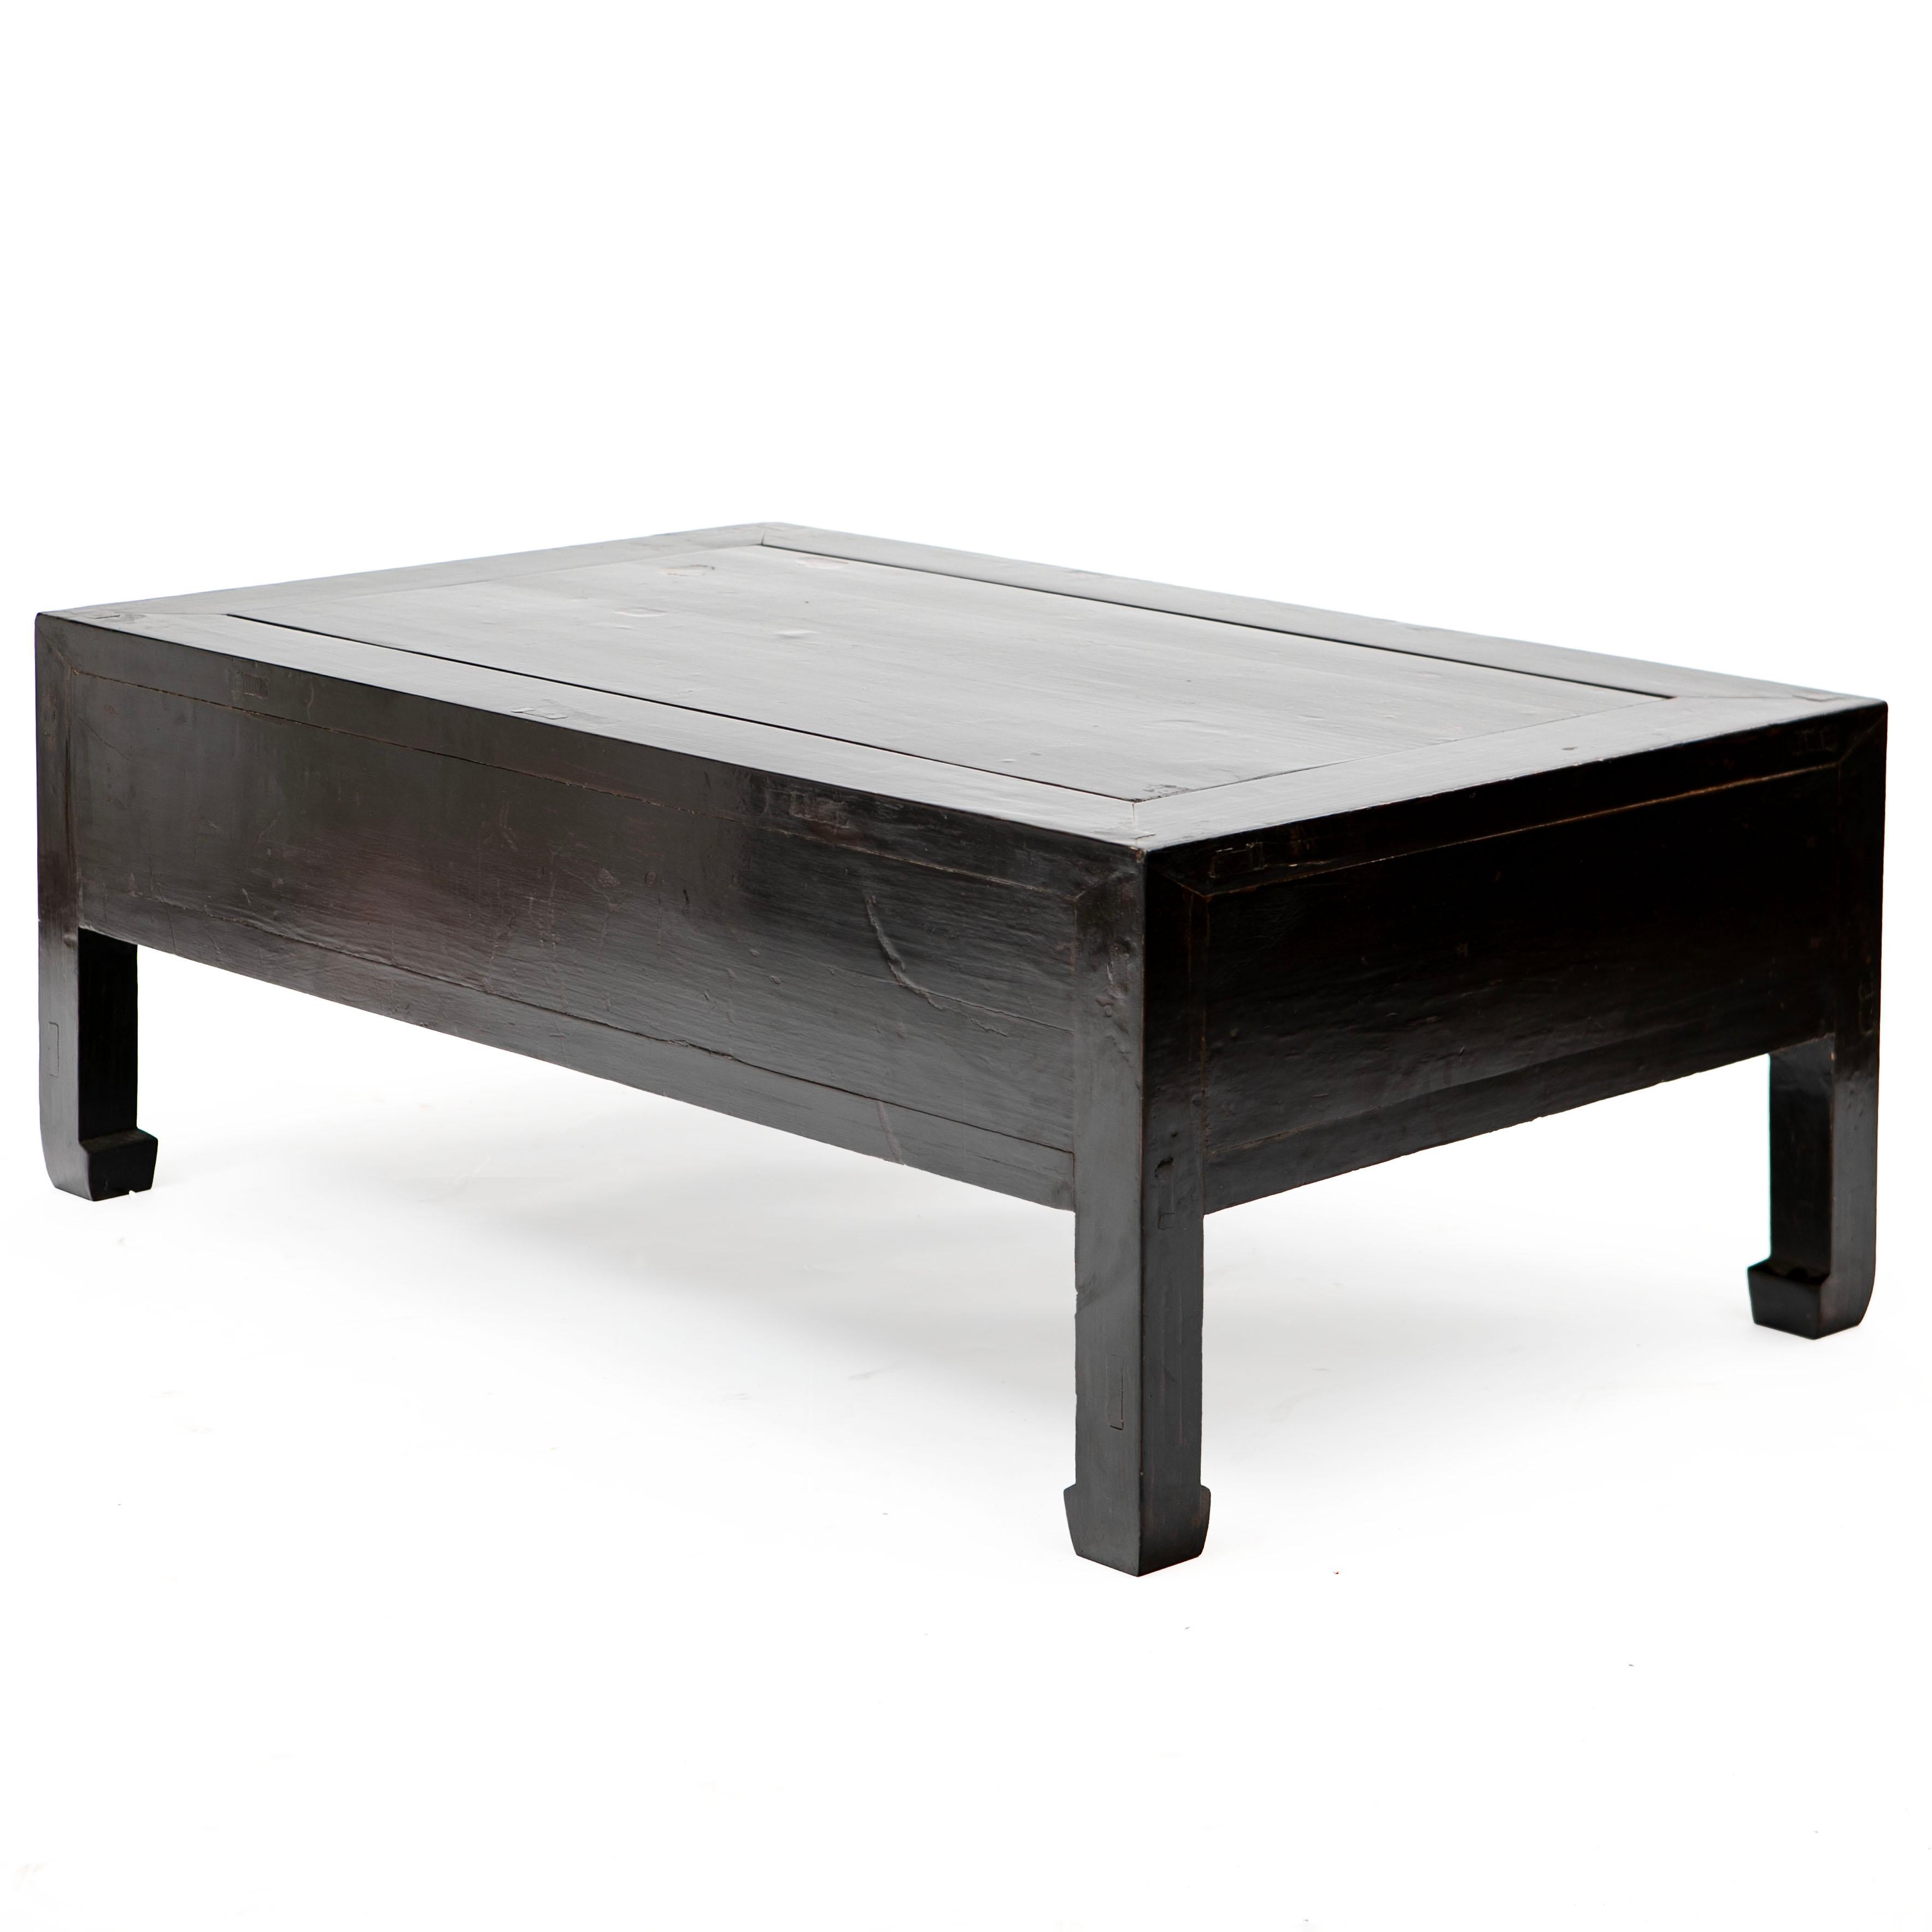 Chinese Black Lacquer Art Deco Coffee Table In Good Condition For Sale In Kastrup, DK